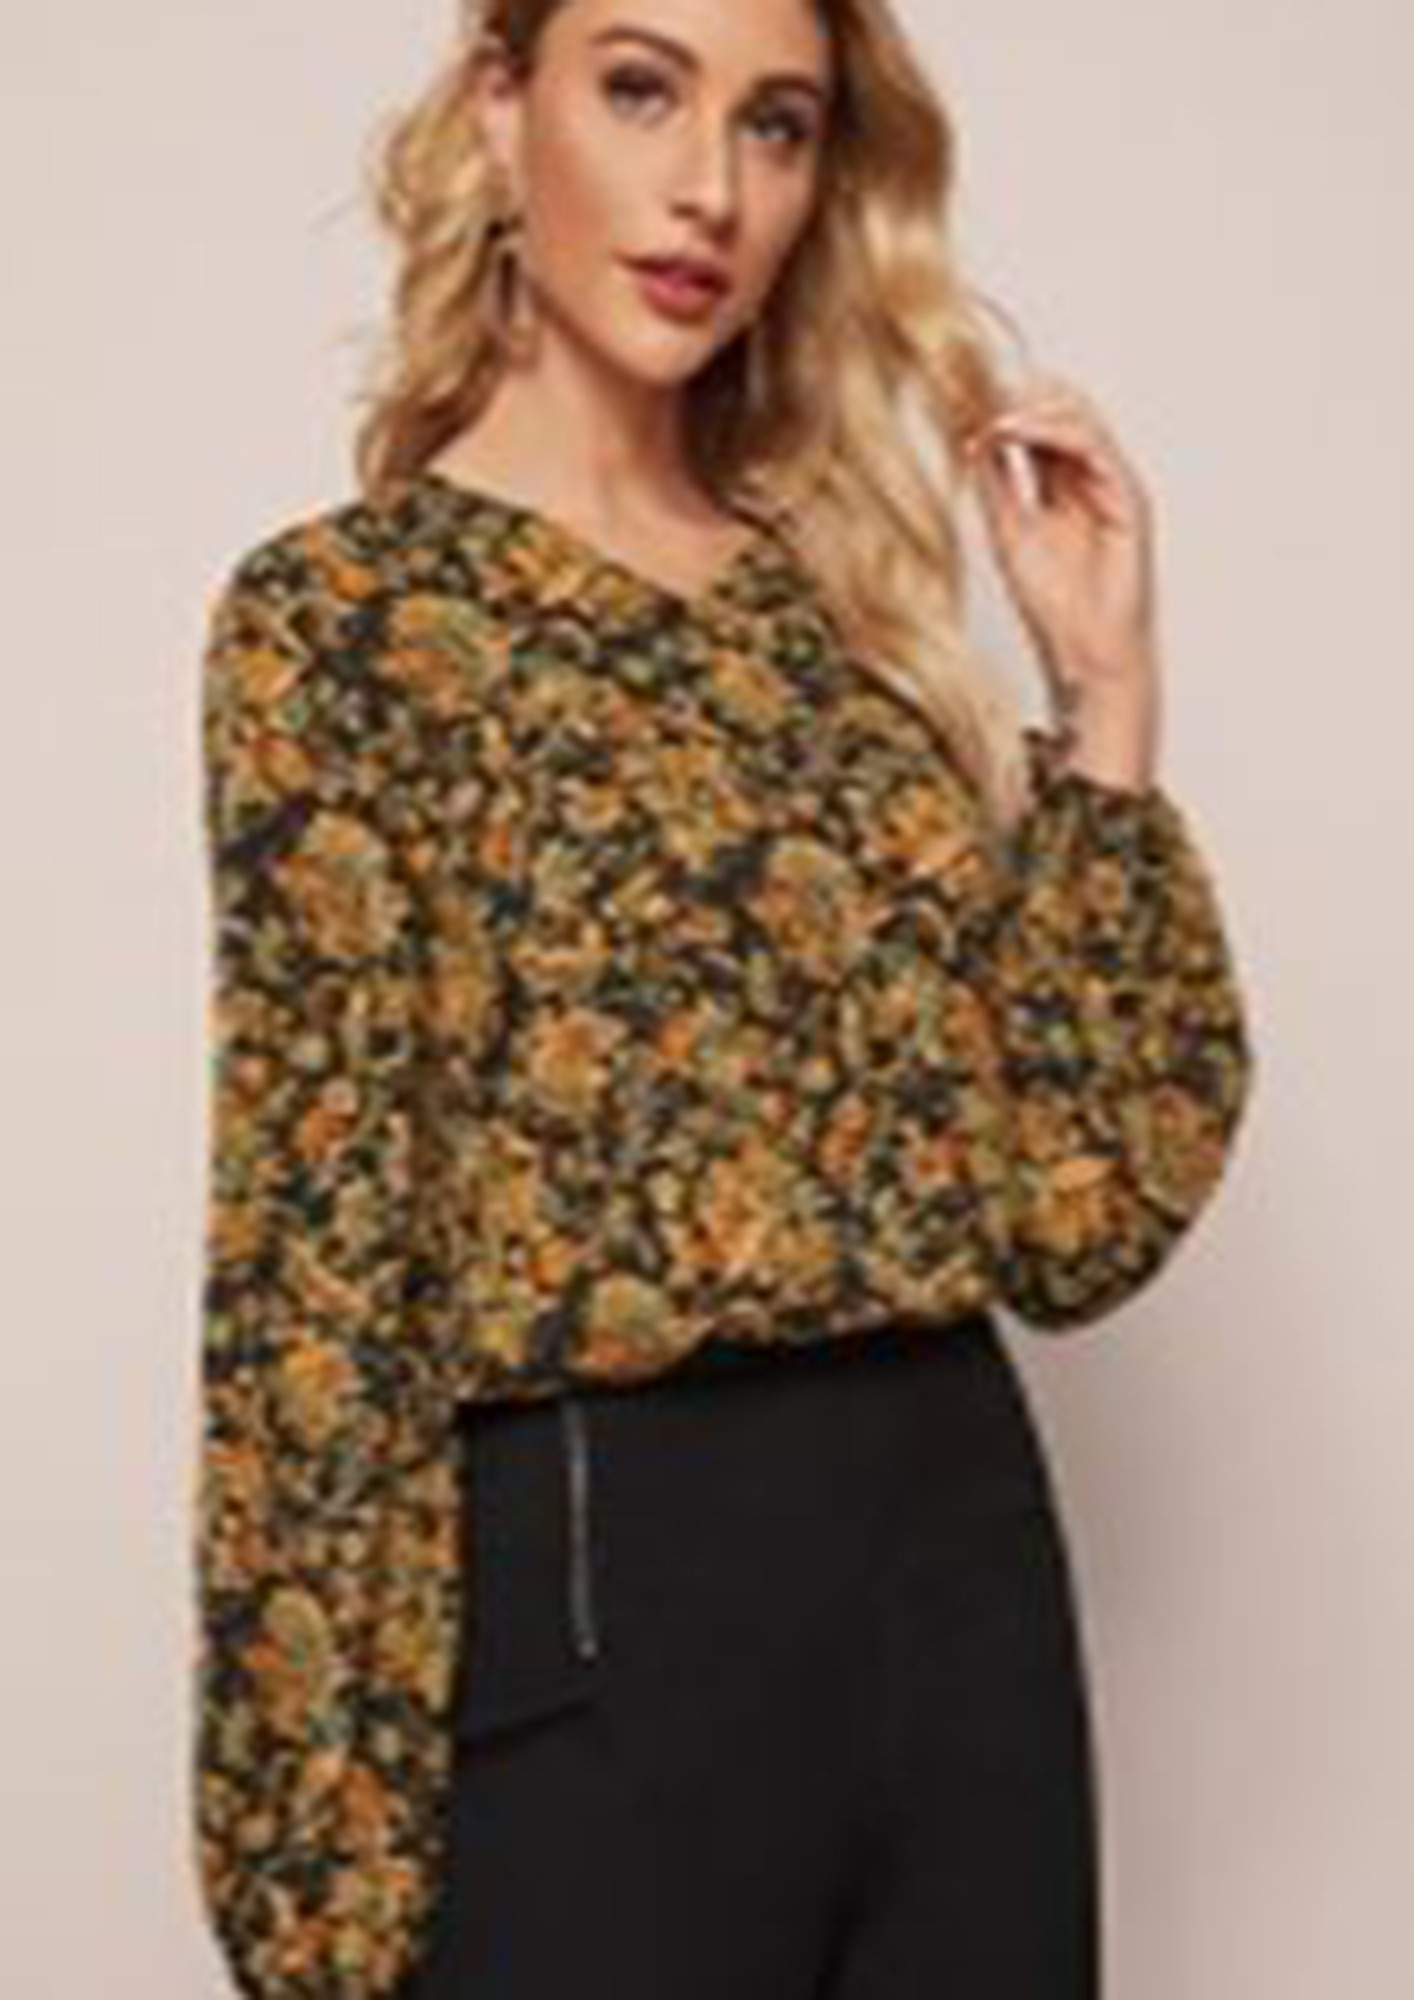 CLASSICAL-VINTAGE-GURL YELLOW V-NECK PRINTED  BLOUSE TOP